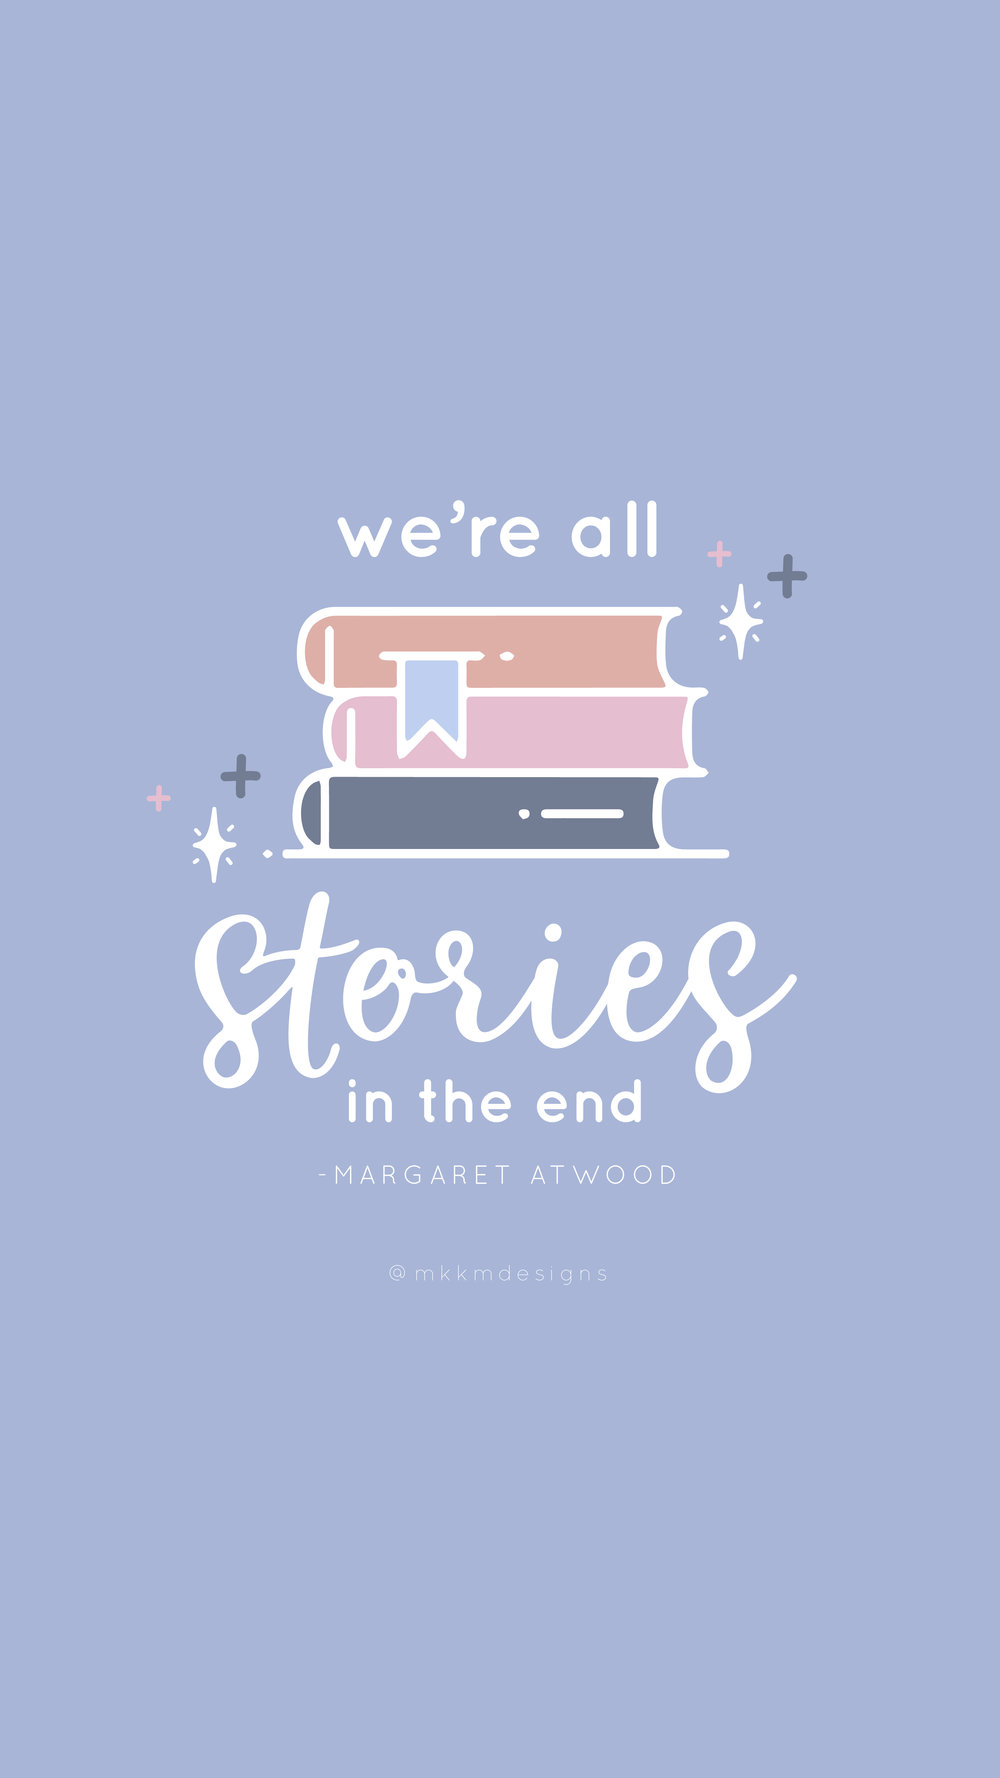 we're all stories in the end - margaret atwood / one of my favorite book quotes @mkkmdesigns - #bookquotes #qotd #mkbookclub